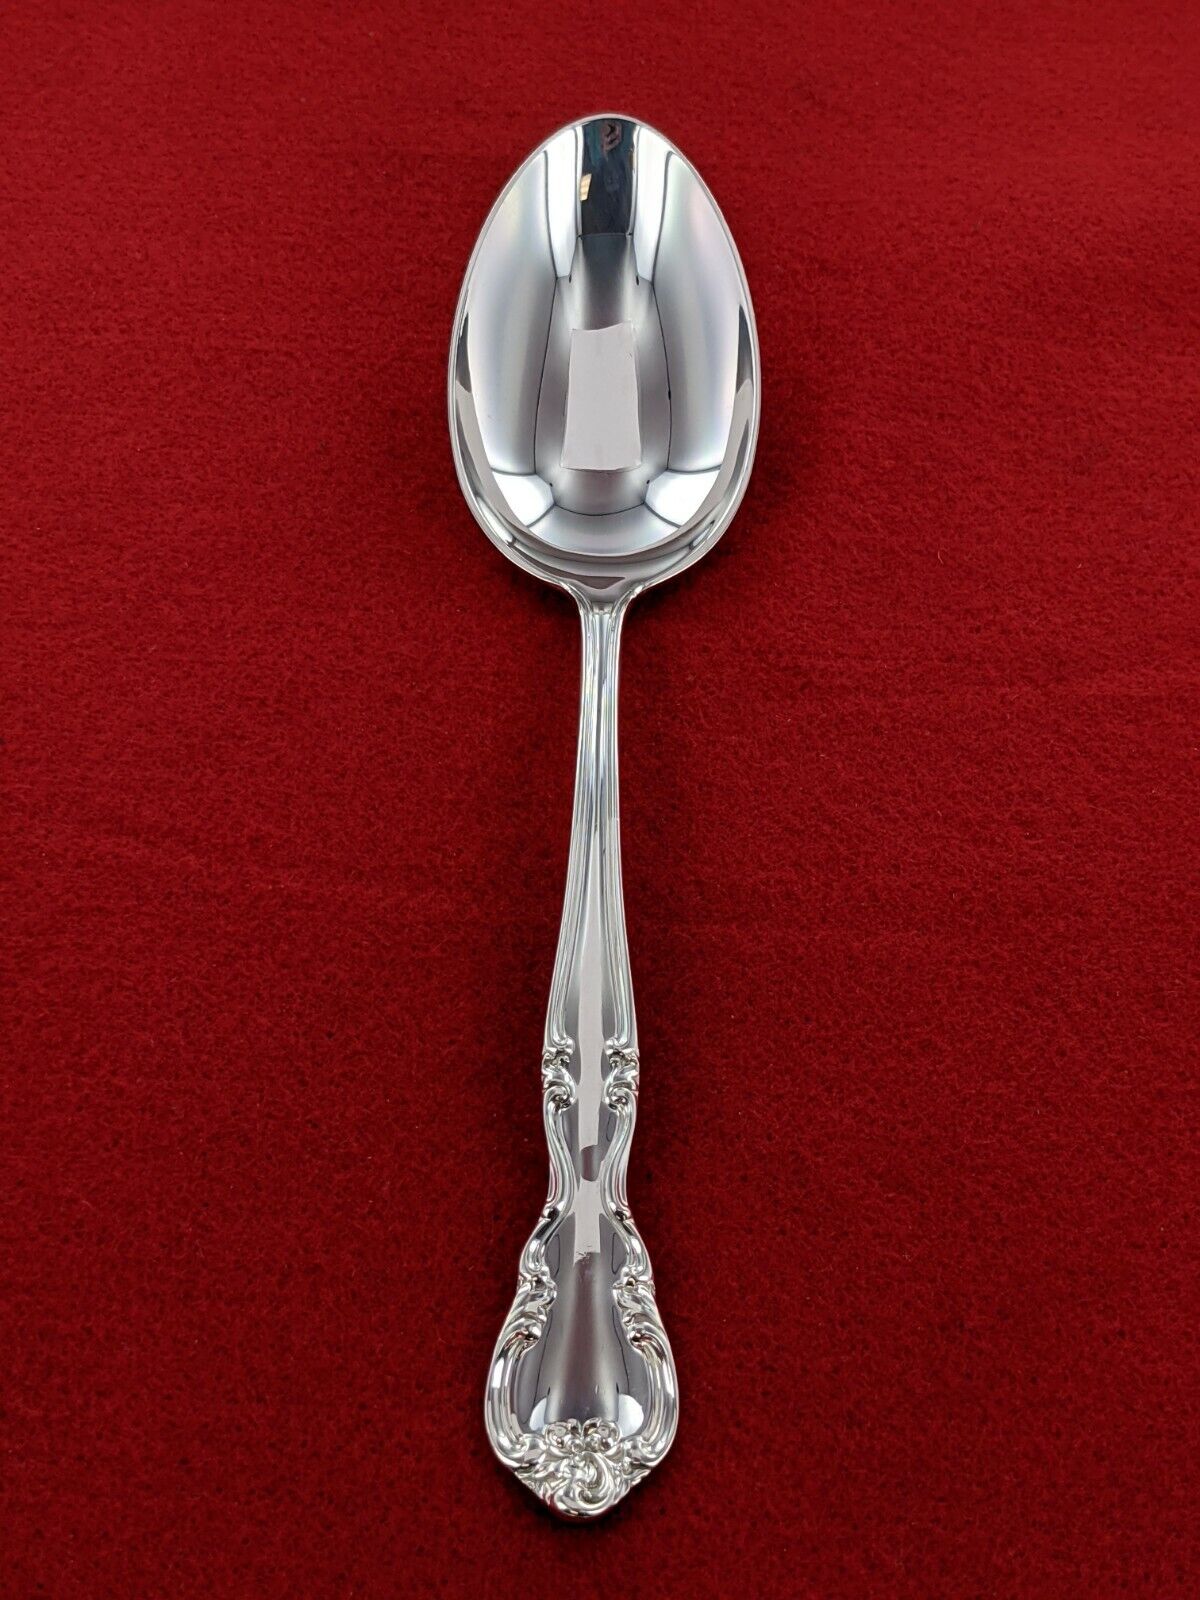 Easterling 1944 American Classic Sterling Silver 8 3/8" Serving Spoon - 187600A